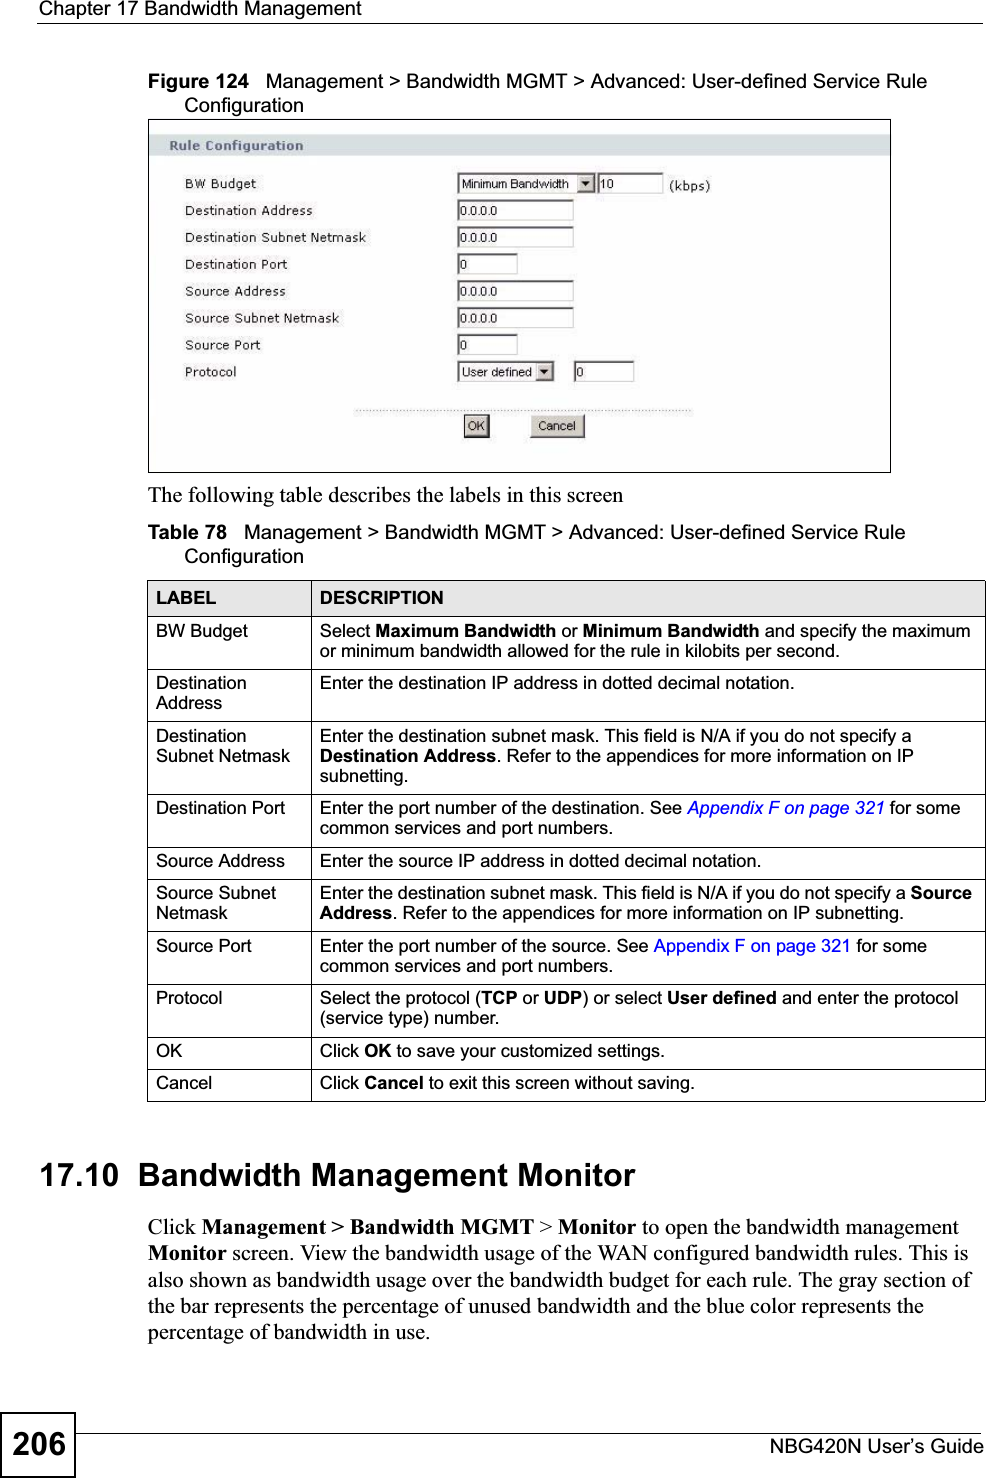 Chapter 17 Bandwidth ManagementNBG420N User’s Guide206Figure 124   Management &gt; Bandwidth MGMT &gt; Advanced: User-defined Service Rule Configuration The following table describes the labels in this screenTable 78   Management &gt; Bandwidth MGMT &gt; Advanced: User-defined Service Rule Configuration  17.10  Bandwidth Management Monitor    Click Management &gt; Bandwidth MGMT &gt; Monitor to open the bandwidth management Monitor screen. View the bandwidth usage of the WAN configured bandwidth rules. This is also shown as bandwidth usage over the bandwidth budget for each rule. The gray section of the bar represents the percentage of unused bandwidth and the blue color represents the percentage of bandwidth in use.LABEL DESCRIPTIONBW Budget Select Maximum Bandwidth or Minimum Bandwidth and specify the maximum or minimum bandwidth allowed for the rule in kilobits per second. Destination AddressEnter the destination IP address in dotted decimal notation.Destination Subnet NetmaskEnter the destination subnet mask. This field is N/A if you do not specify a Destination Address. Refer to the appendices for more information on IP subnetting.Destination Port Enter the port number of the destination. See Appendix F on page 321 for some common services and port numbers.Source Address Enter the source IP address in dotted decimal notation.Source Subnet NetmaskEnter the destination subnet mask. This field is N/A if you do not specify a Source Address. Refer to the appendices for more information on IP subnetting.Source Port Enter the port number of the source. See Appendix F on page 321 for some common services and port numbers.Protocol Select the protocol (TCP or UDP) or select User defined and enter the protocol (service type) number. OK Click OK to save your customized settings.Cancel Click Cancel to exit this screen without saving.